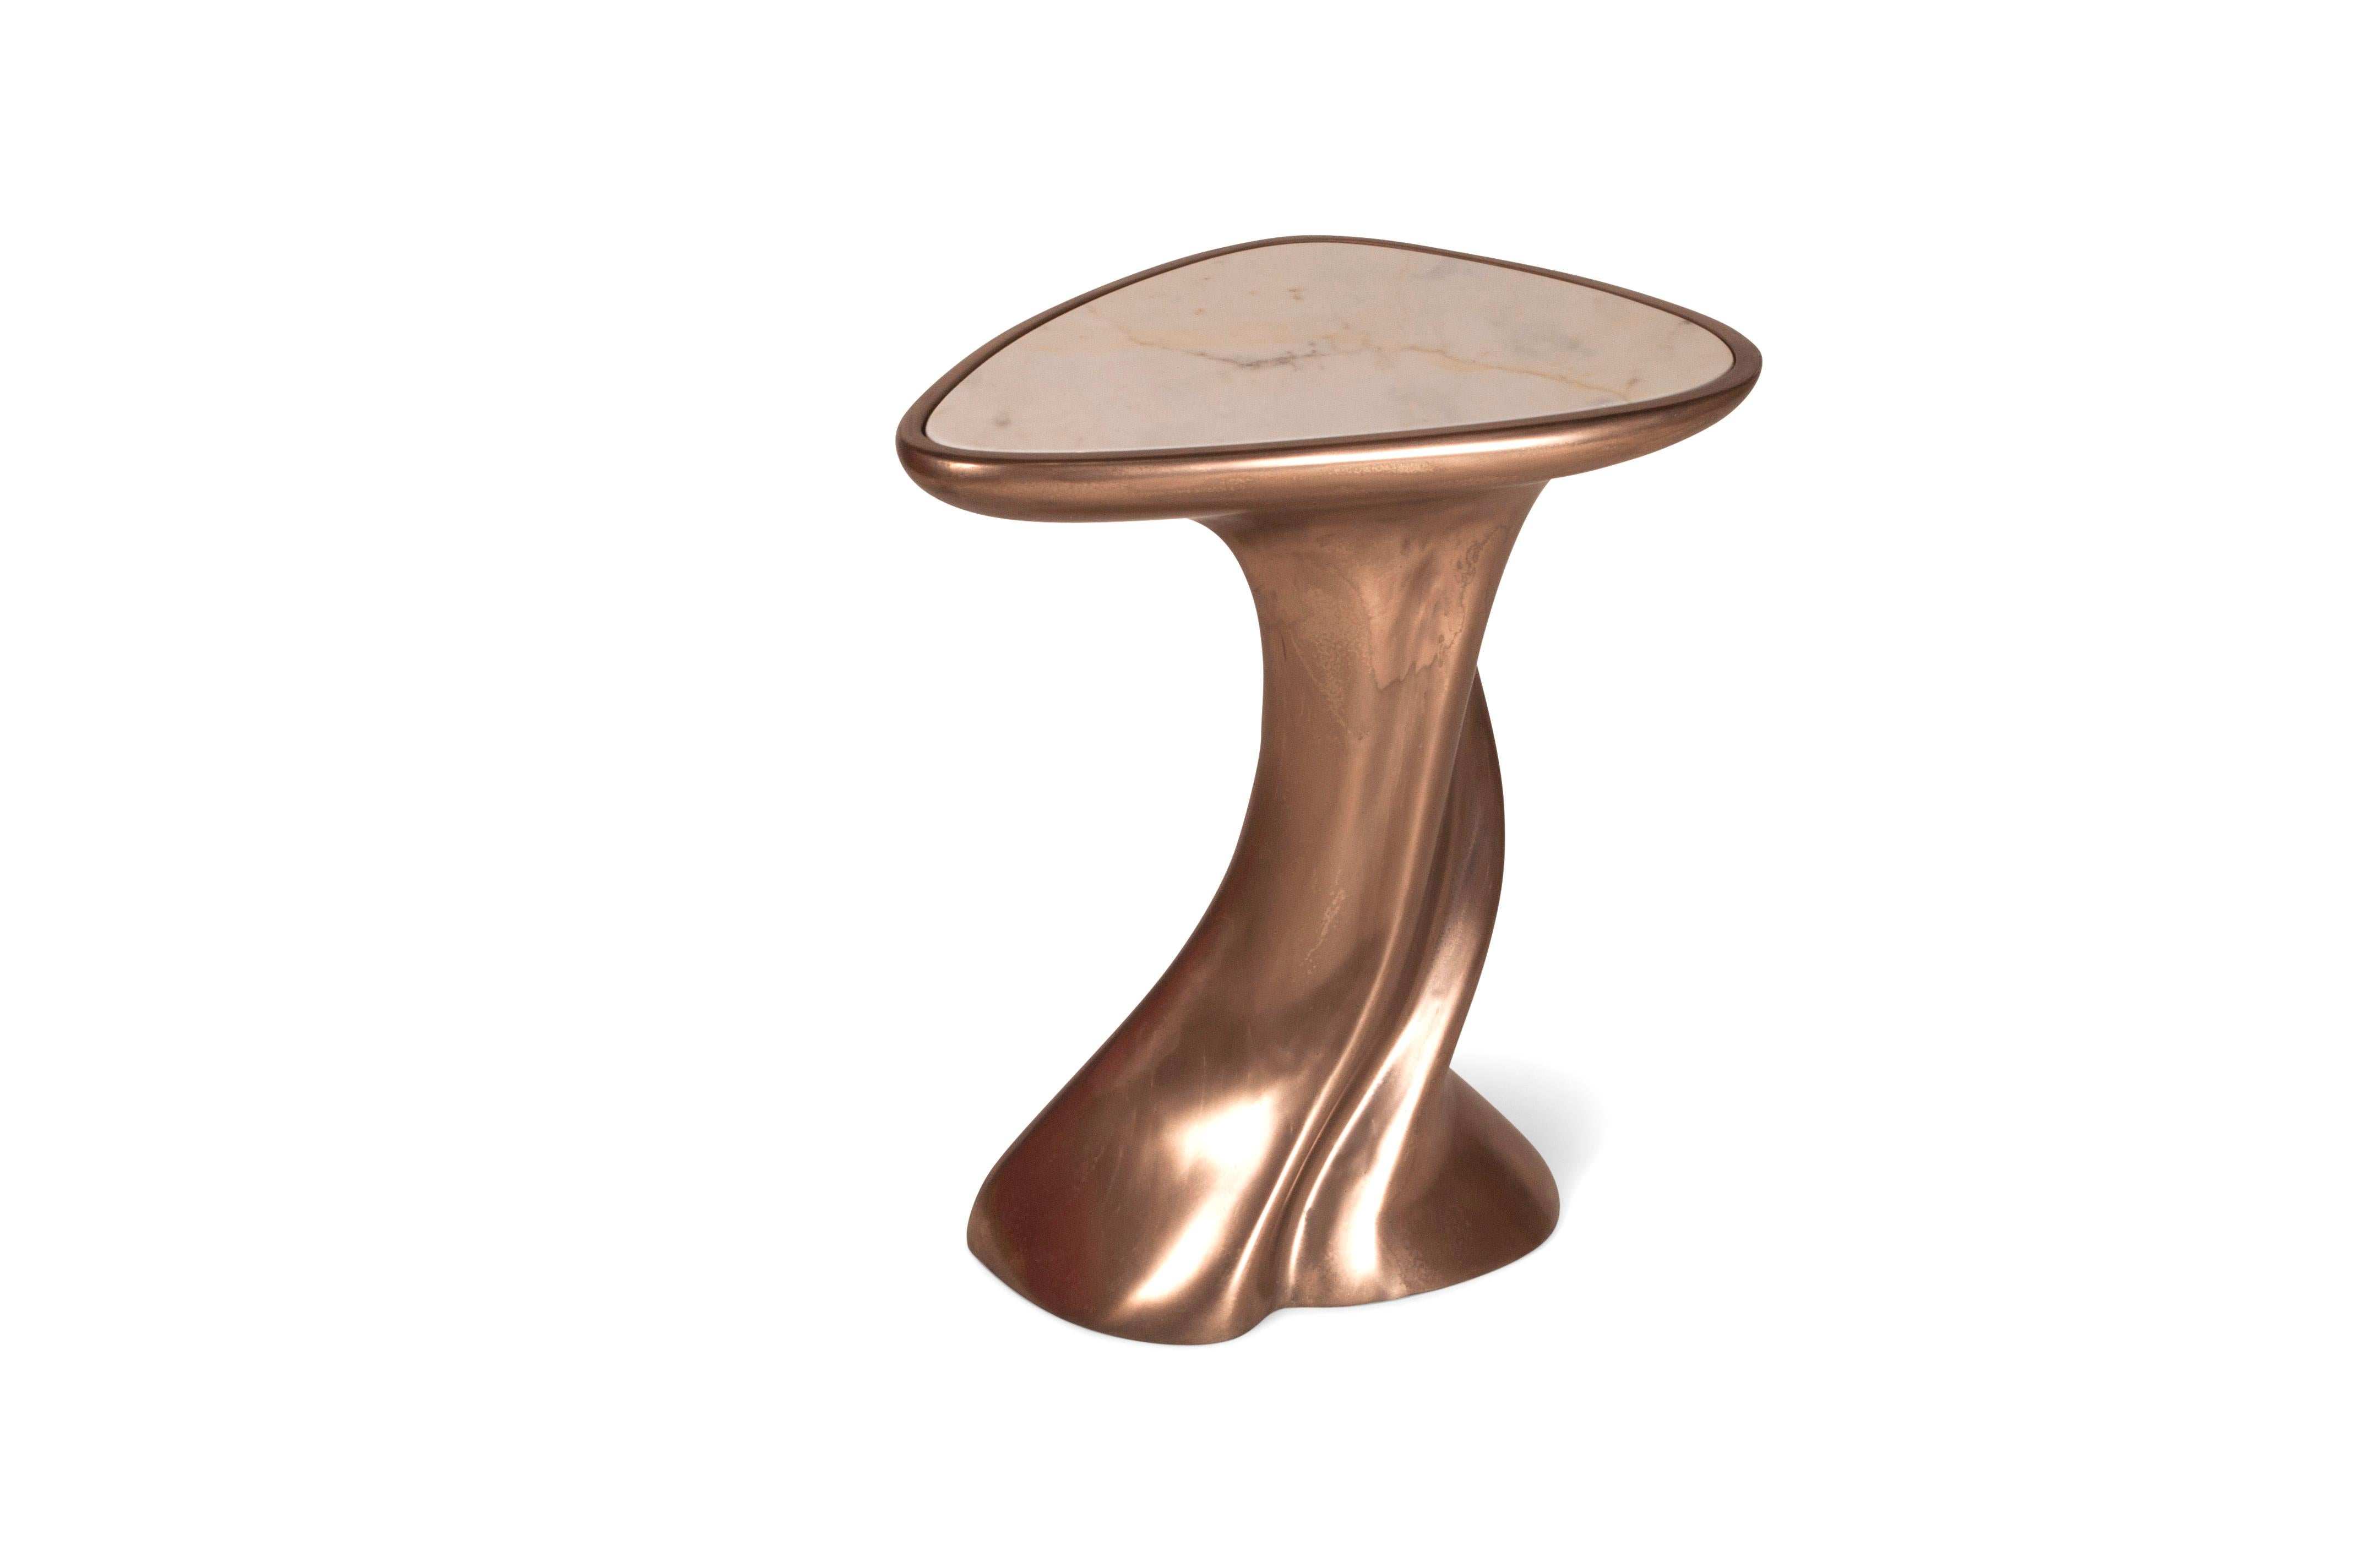 Abbi side table in bronze finish with white marble top. The dimensions are 15